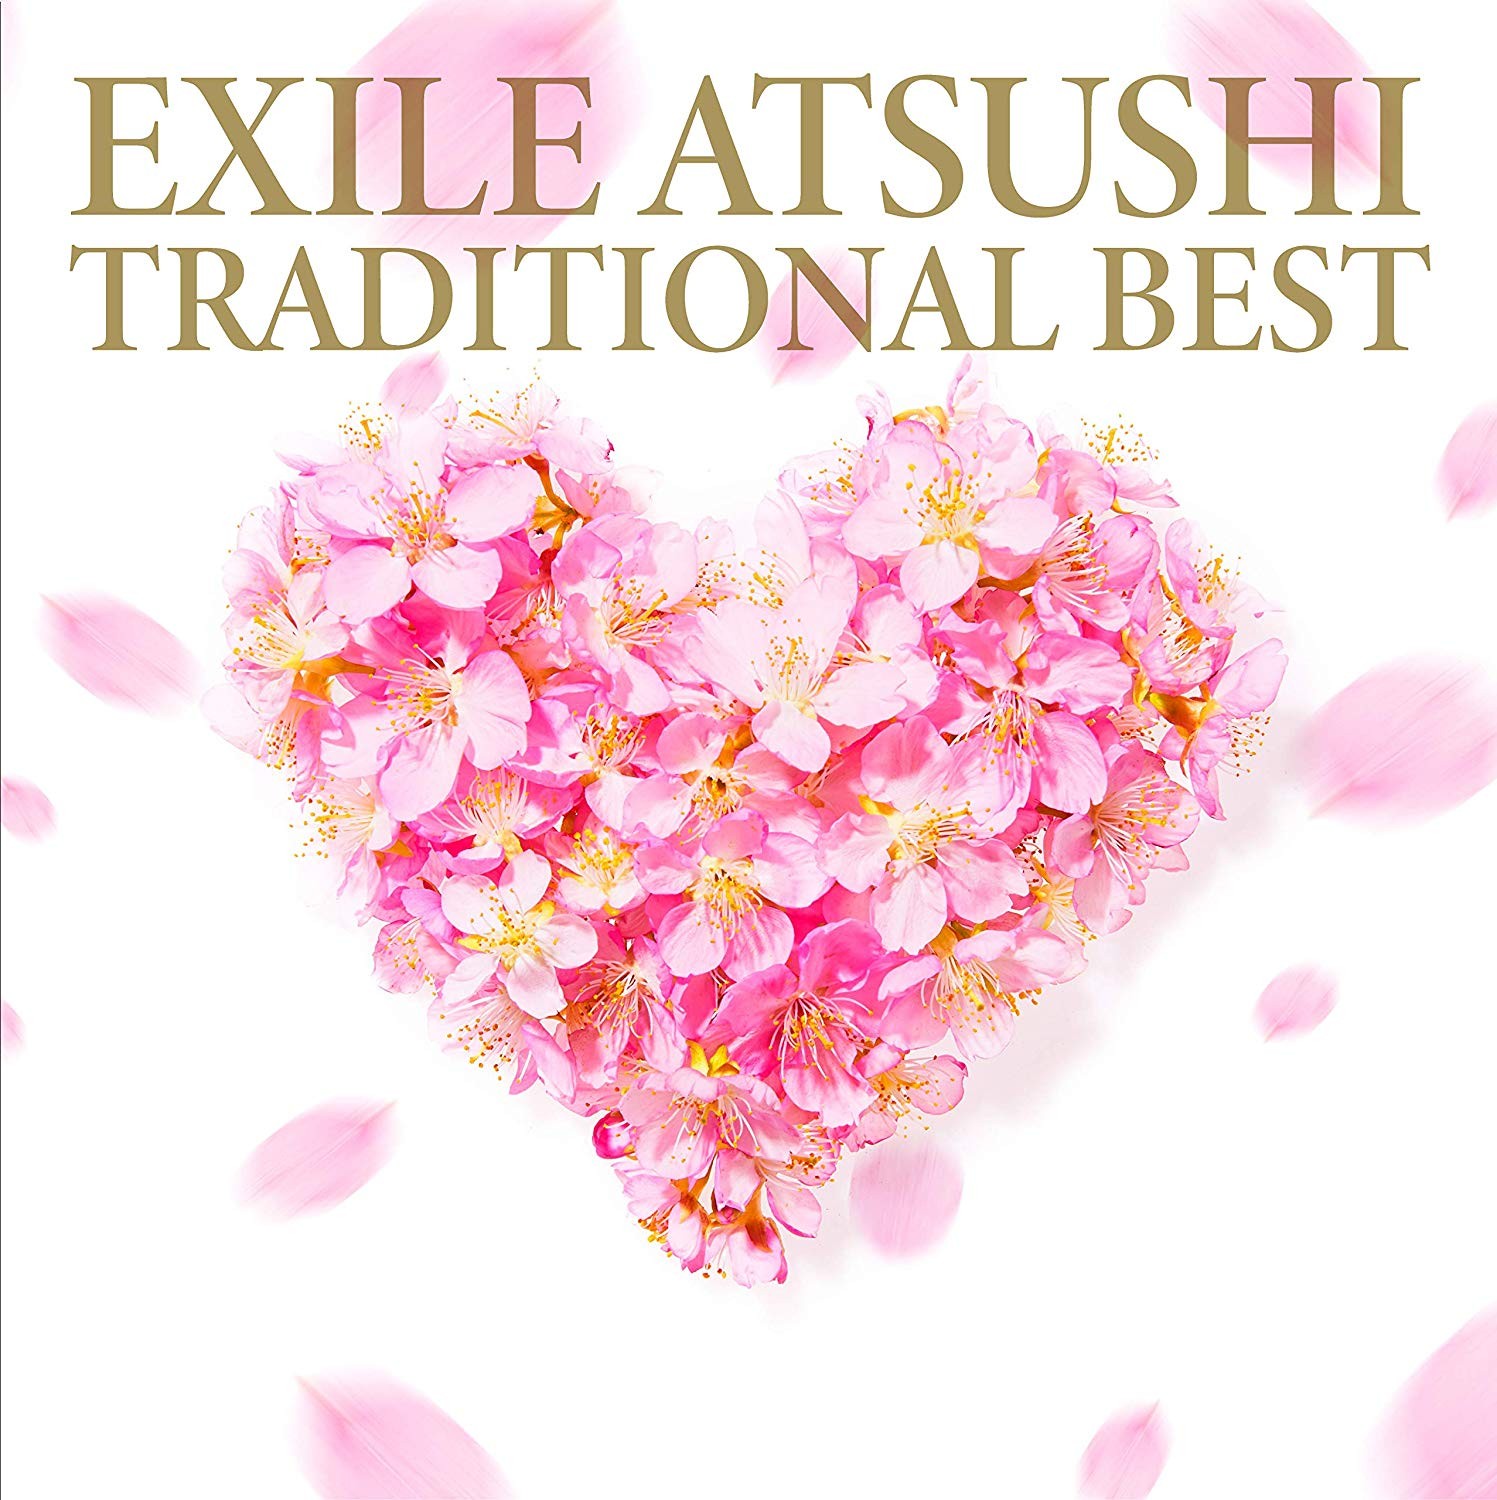 EXILE ATSUSHI – TRADITIONAL BEST [FLAC / 24bit Lossless / WEB] [2019.04.30]